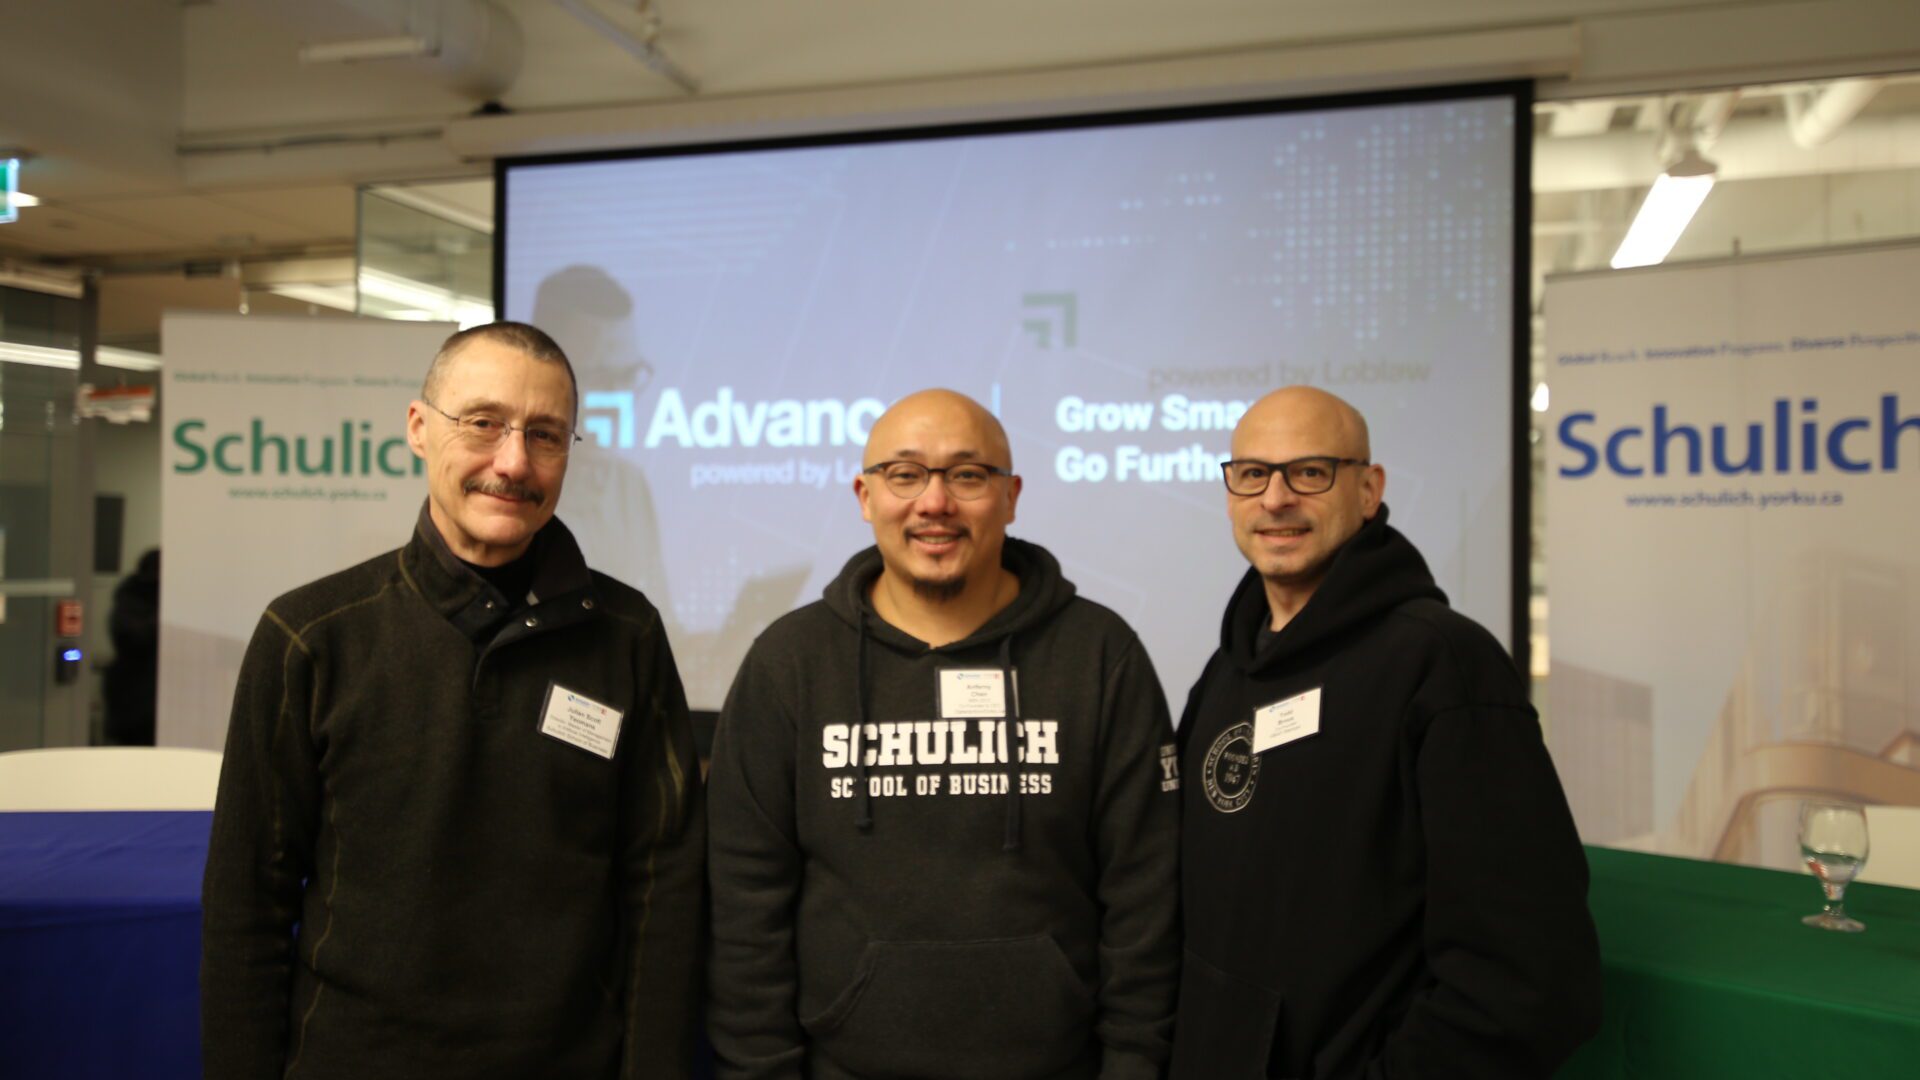 From left to right: Professor Julian Scott Yeomans, Anferny Chen (MBA '12), Todd Brous